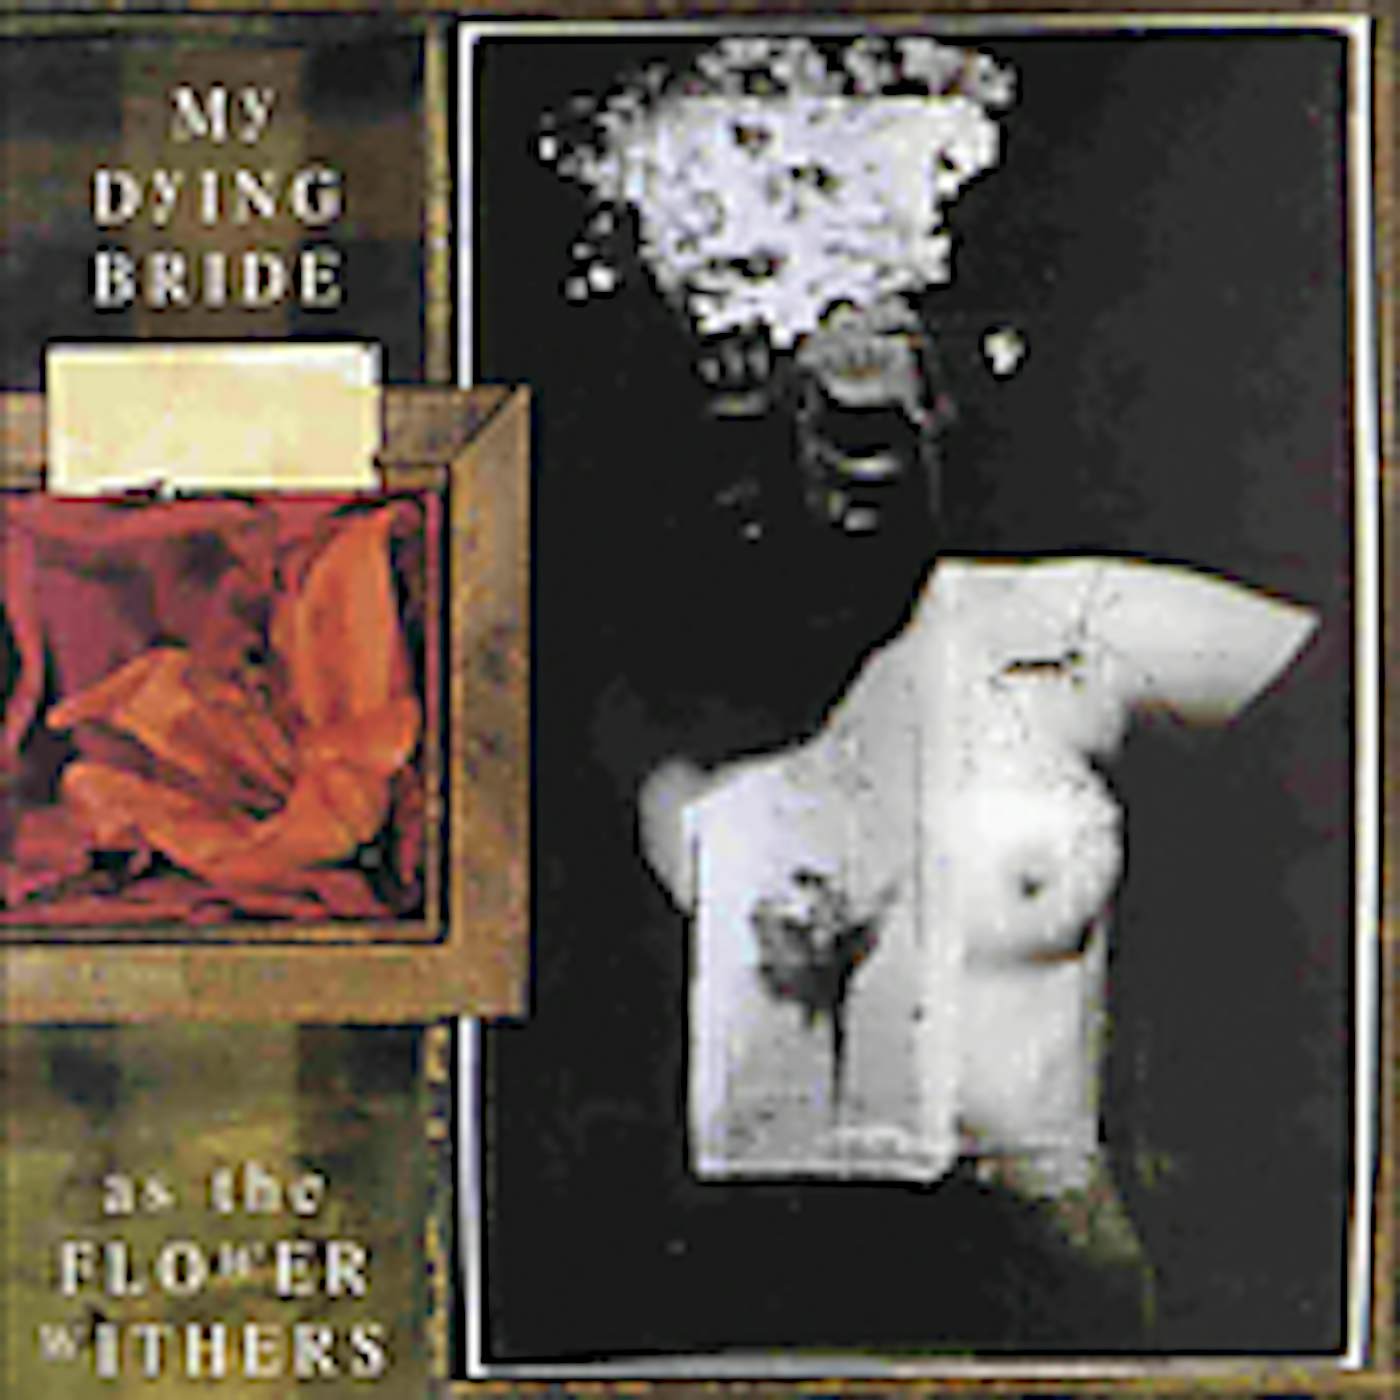 My Dying Bride AS THE FLOWER WITHERS CD